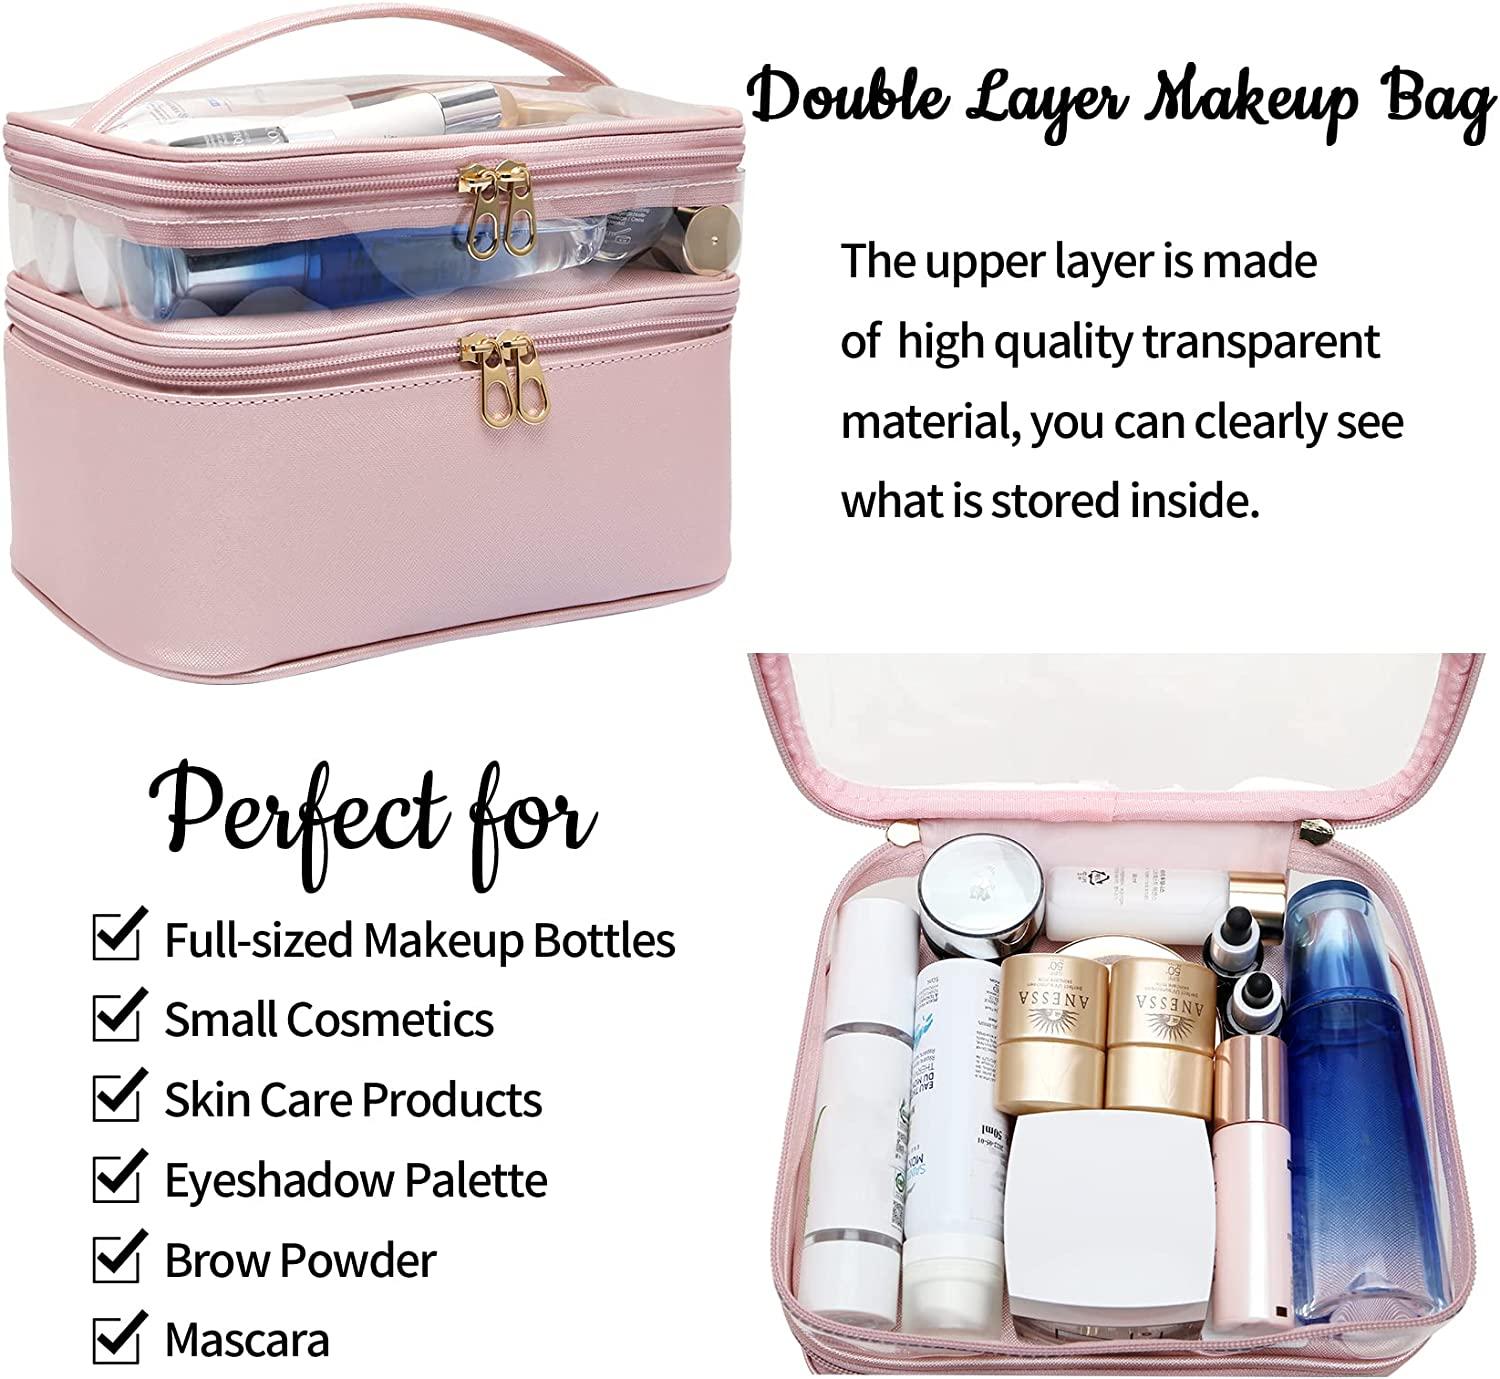 Makeup Bag,Leather Double Layer Large Makeup Organizer Bag,Travel  Accessories Dorm Room Essentials Toiletry Bag for Women,Travel Essentials  Cosmetic